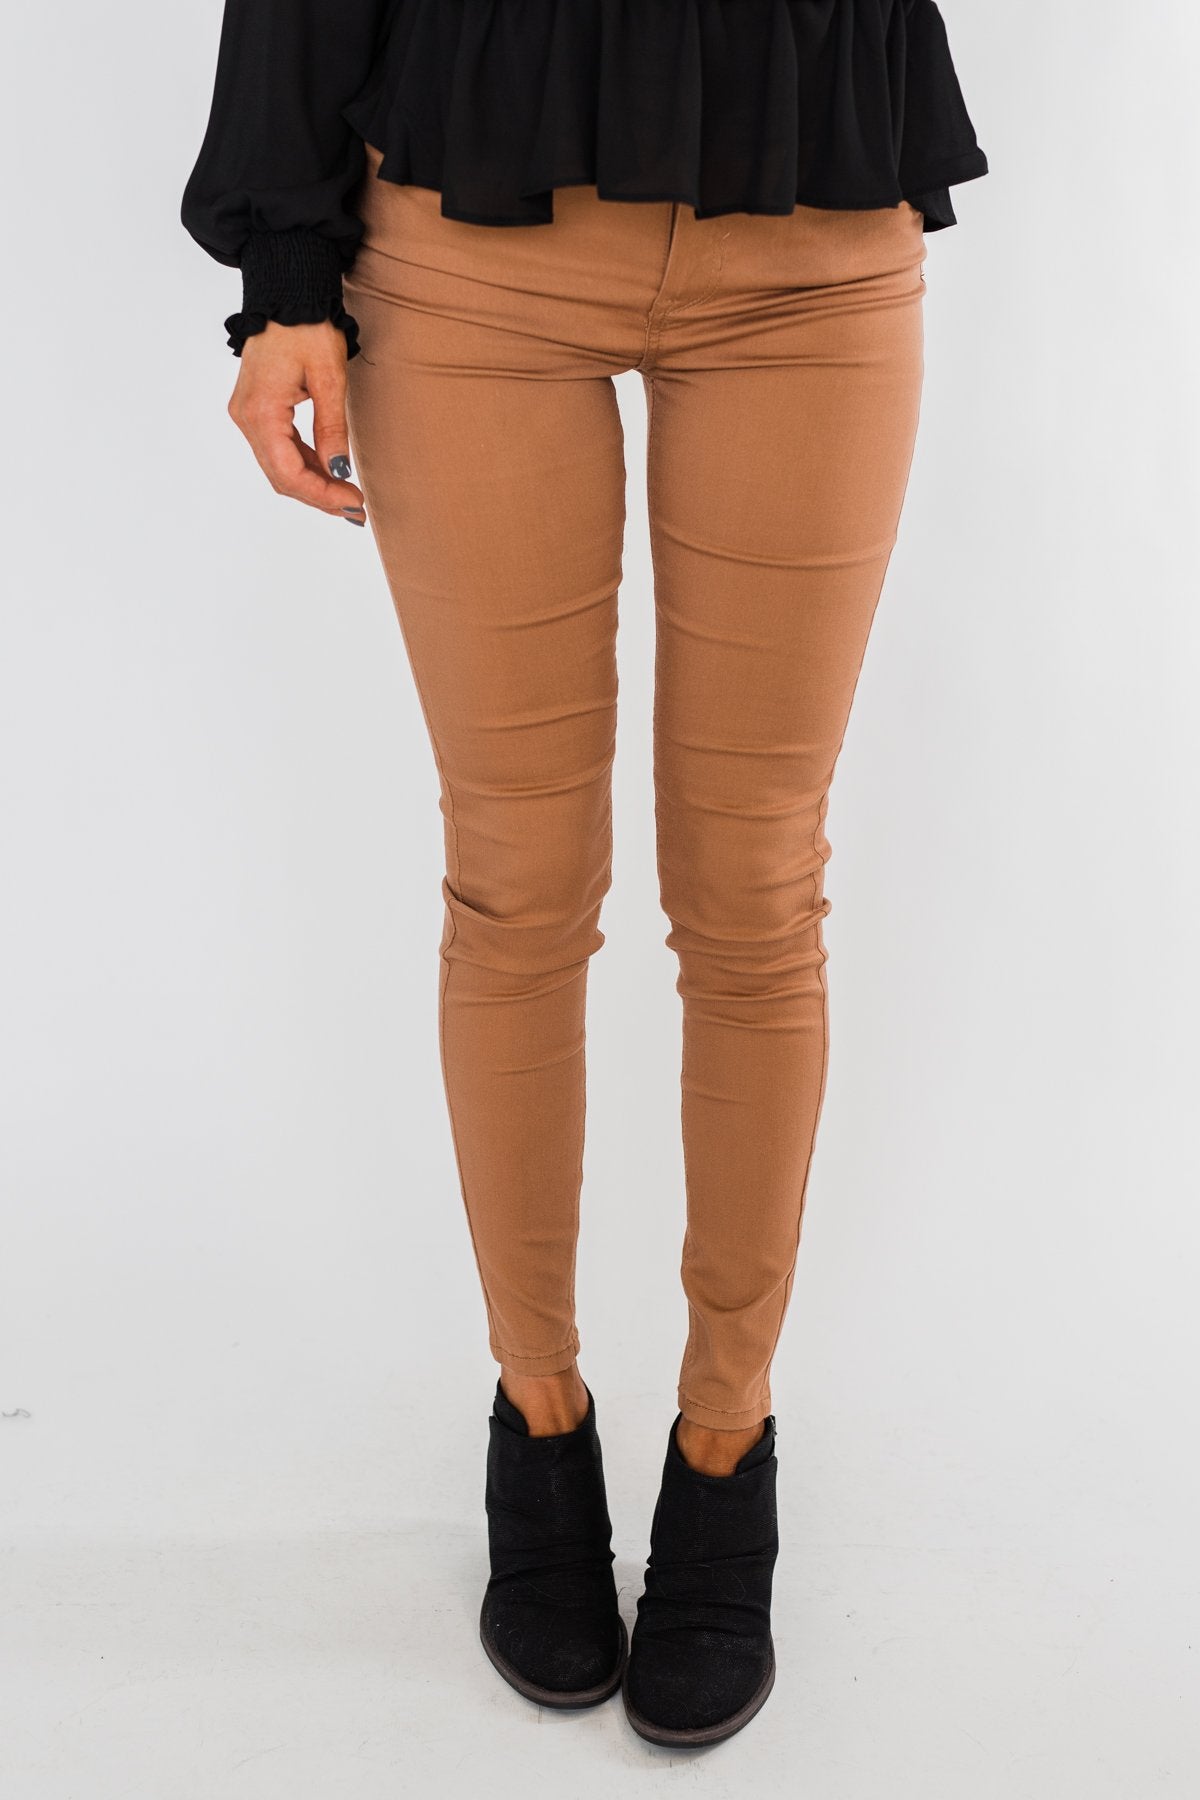 Celebrity Pink Ankle Skinny Jeans- Clay